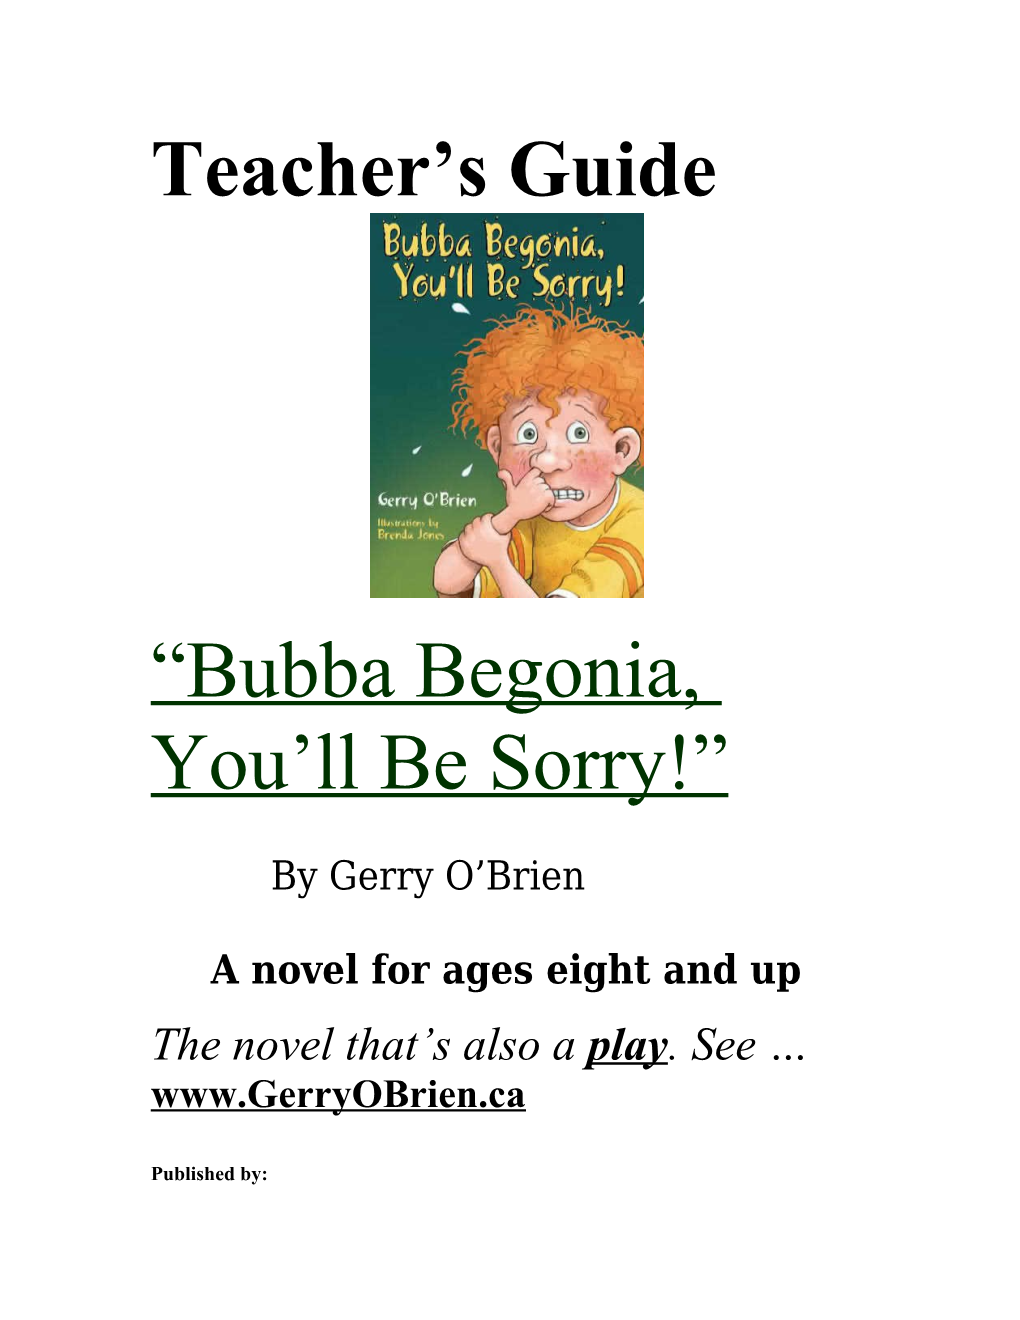 Bubba Begonia, You Ll Be Sorry